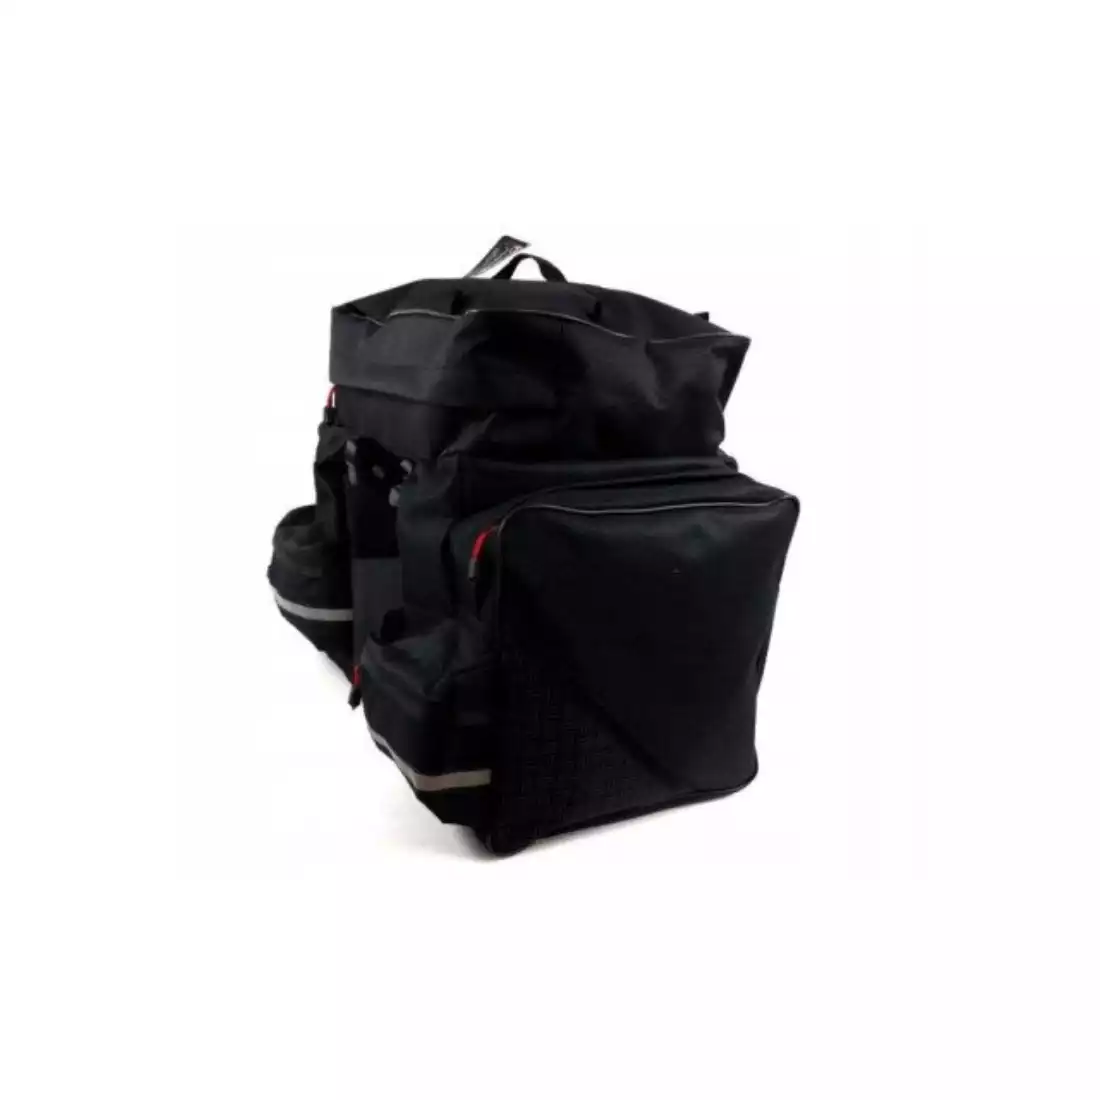 SPENCER bicycle pannier for the trunk 42L, black grille